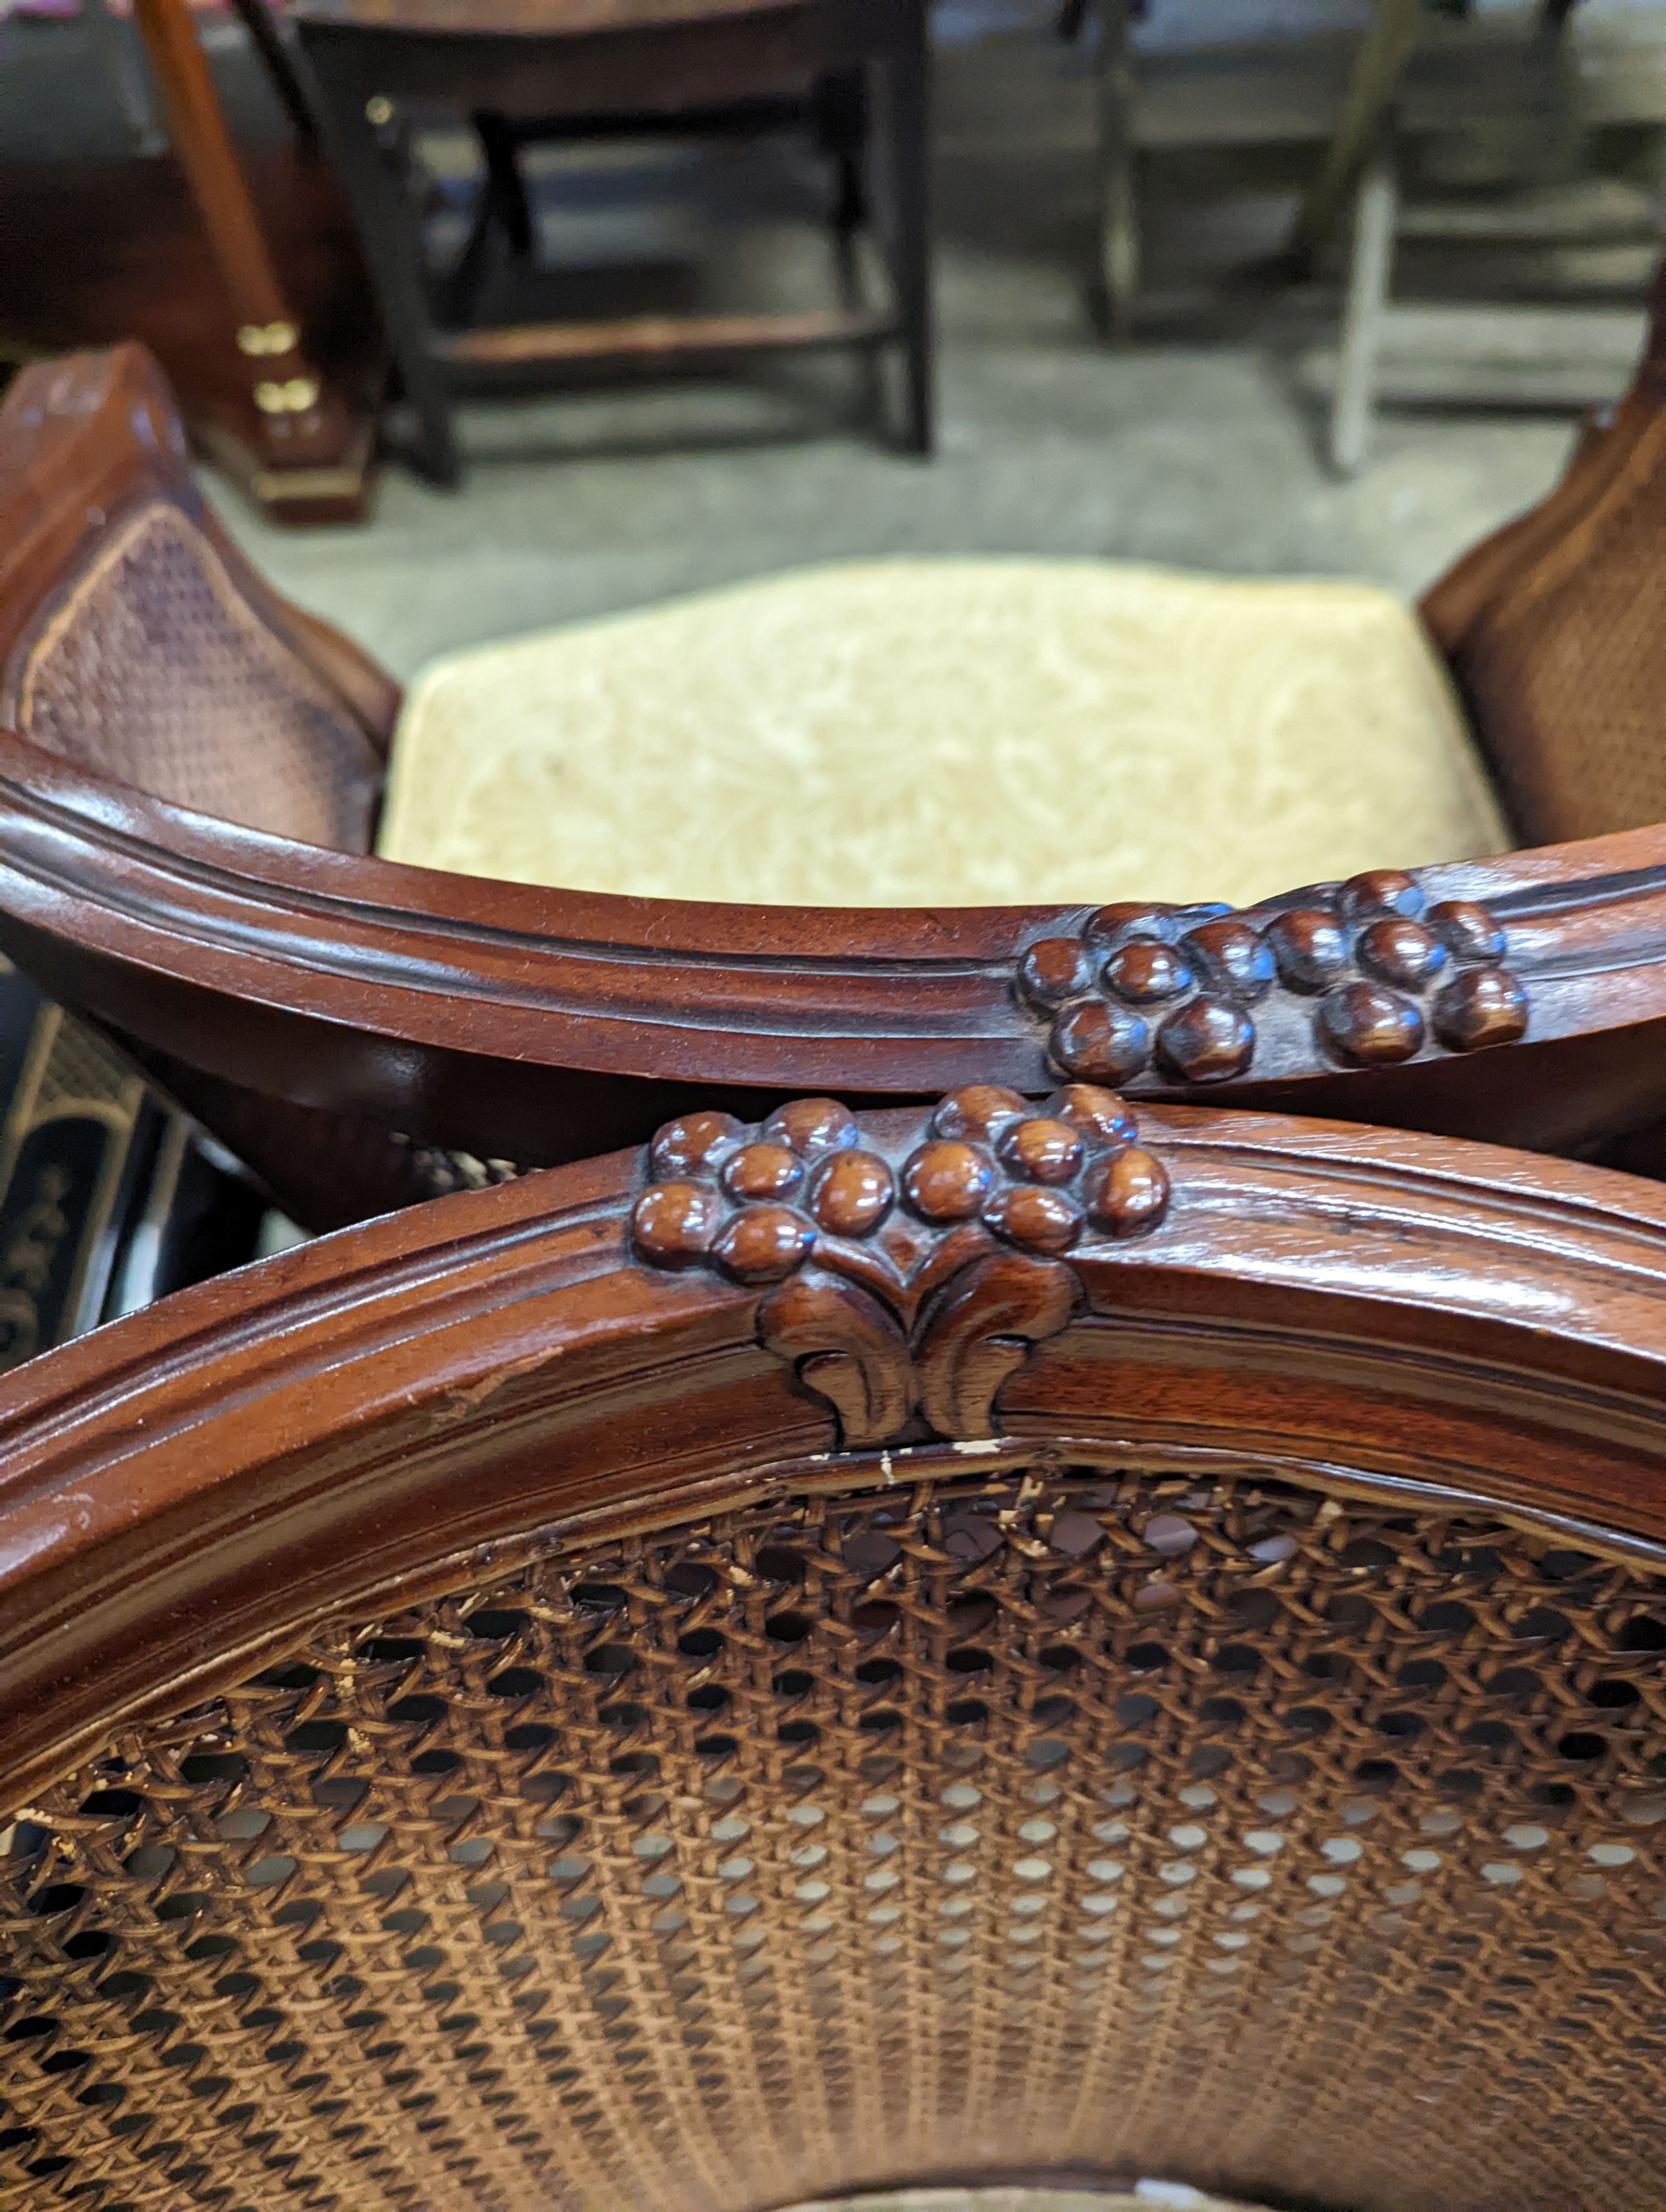 A pair of French mahogany bergere tub chairs, width 62cm, depth 50cm, height 86cm